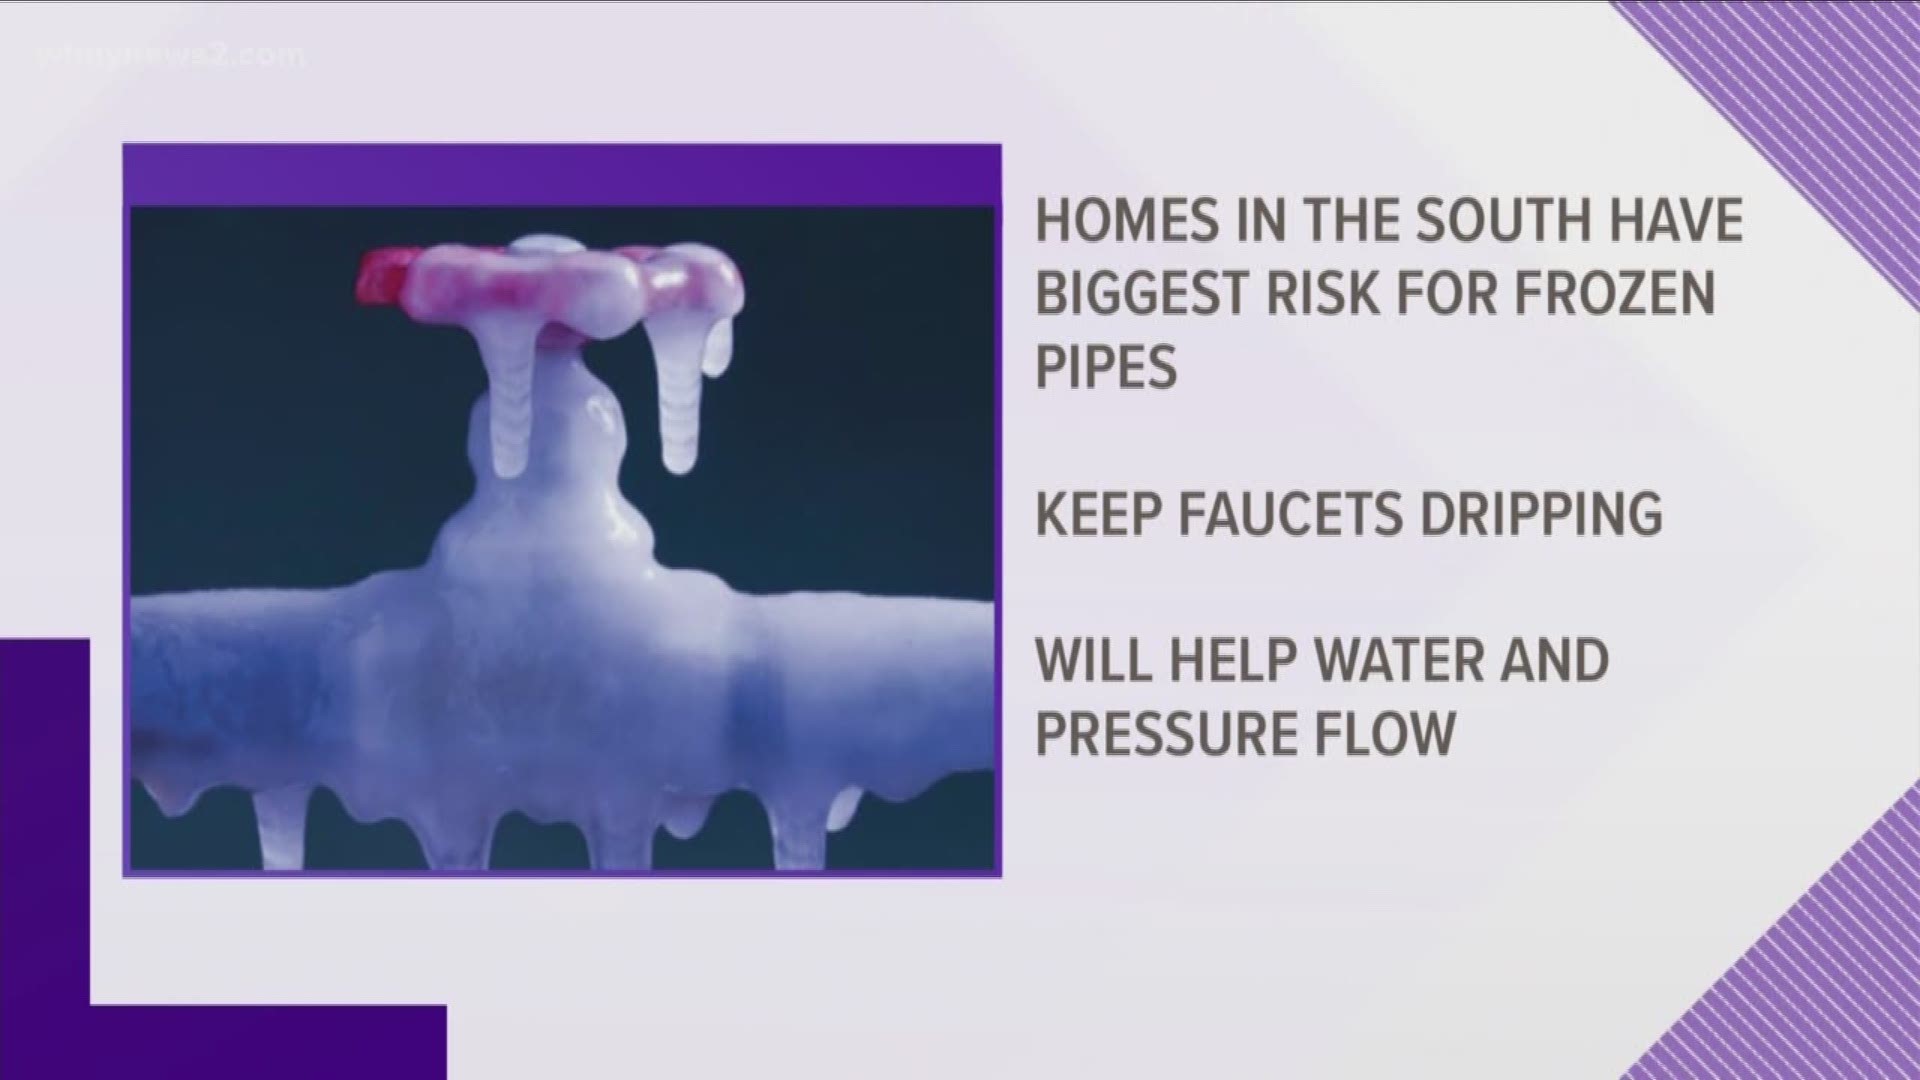 More pipes freeze and burst down south, so make sure you're not cleaning up the mess this winter.